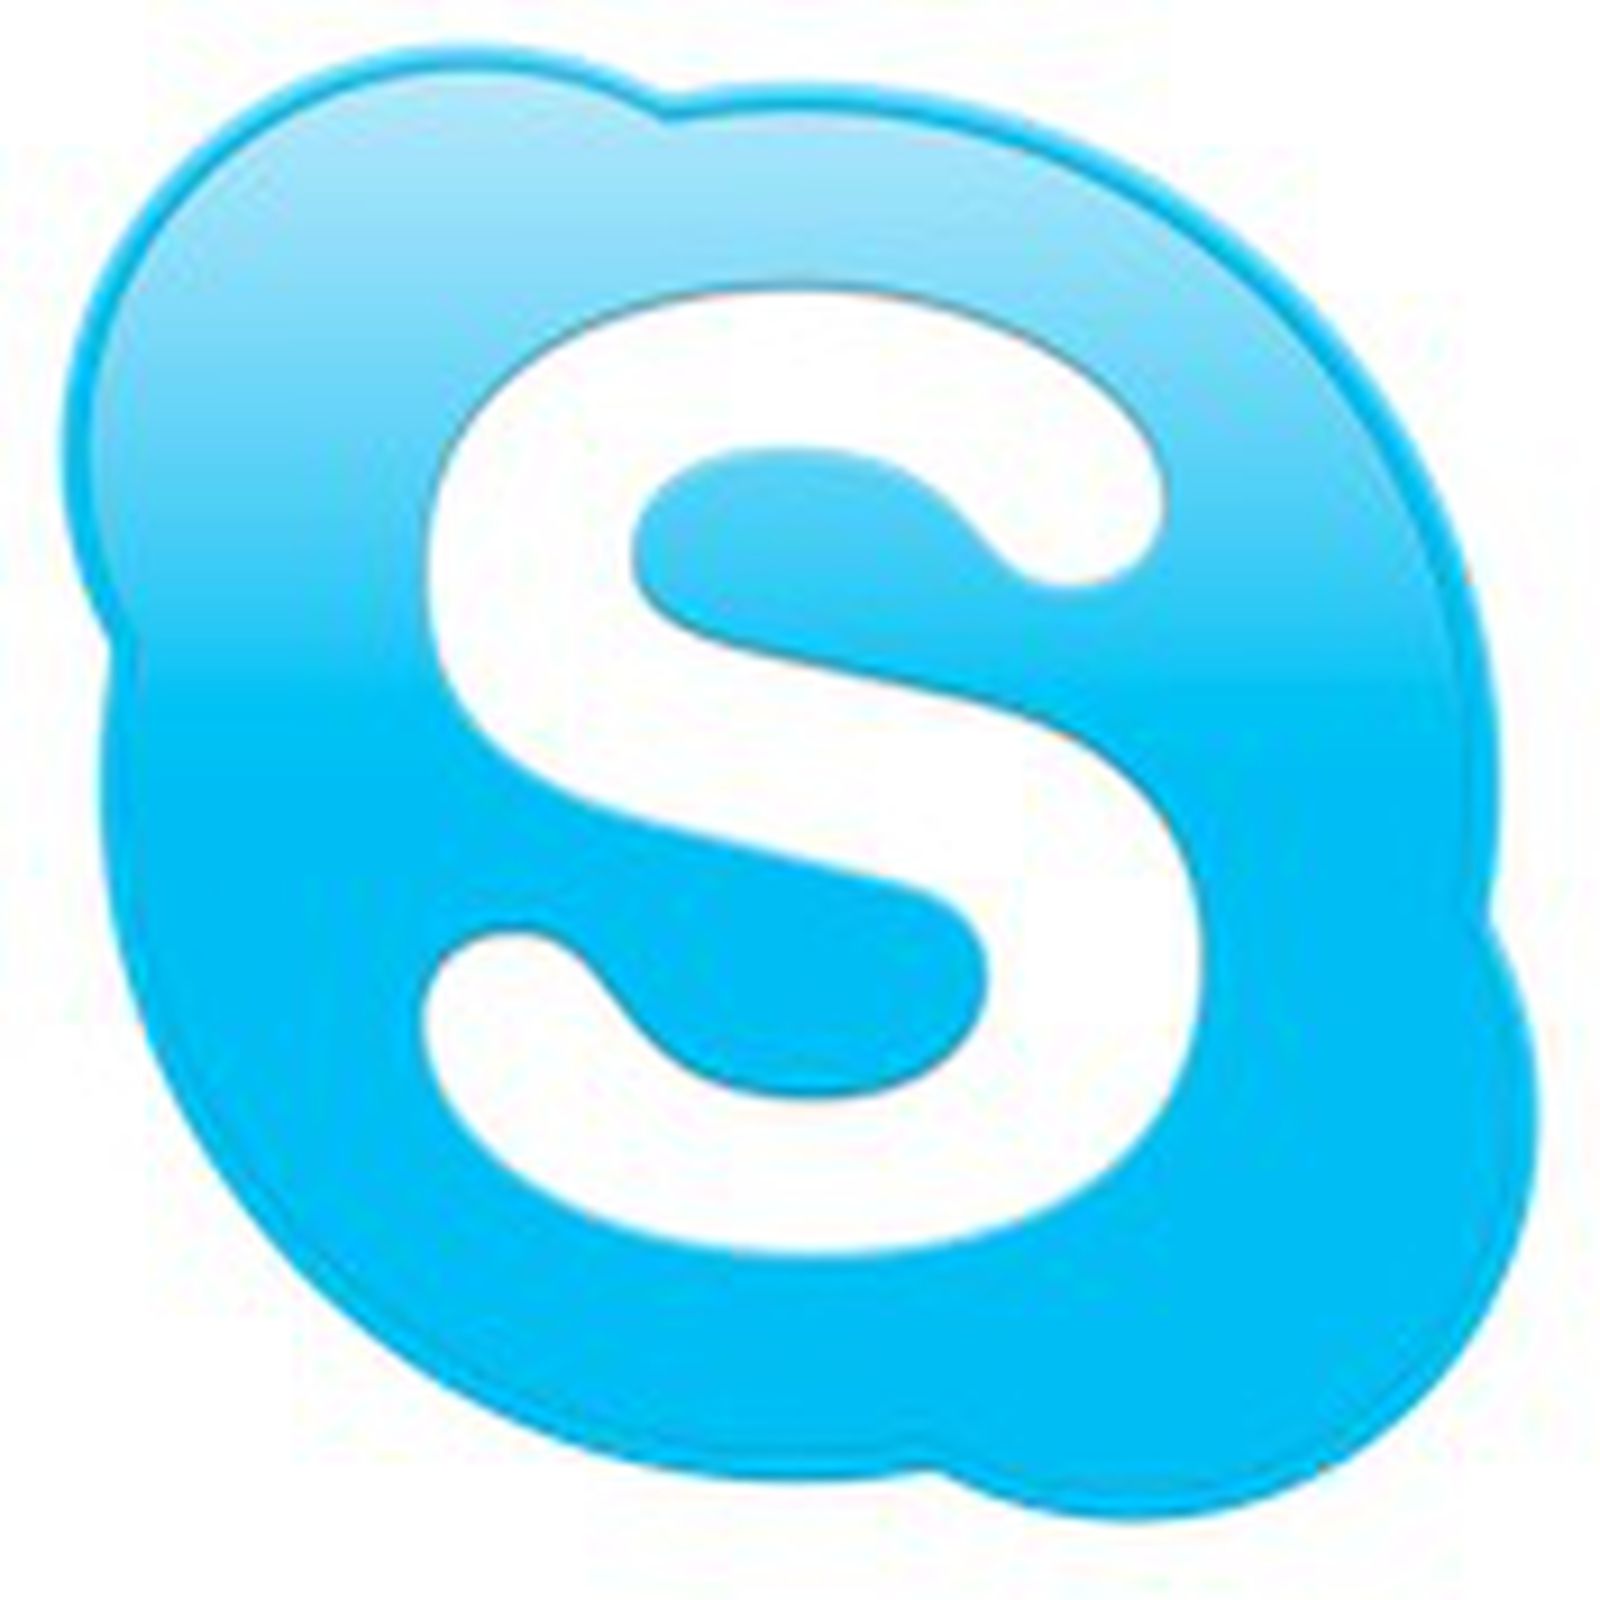 whats the new update for skype on the mac